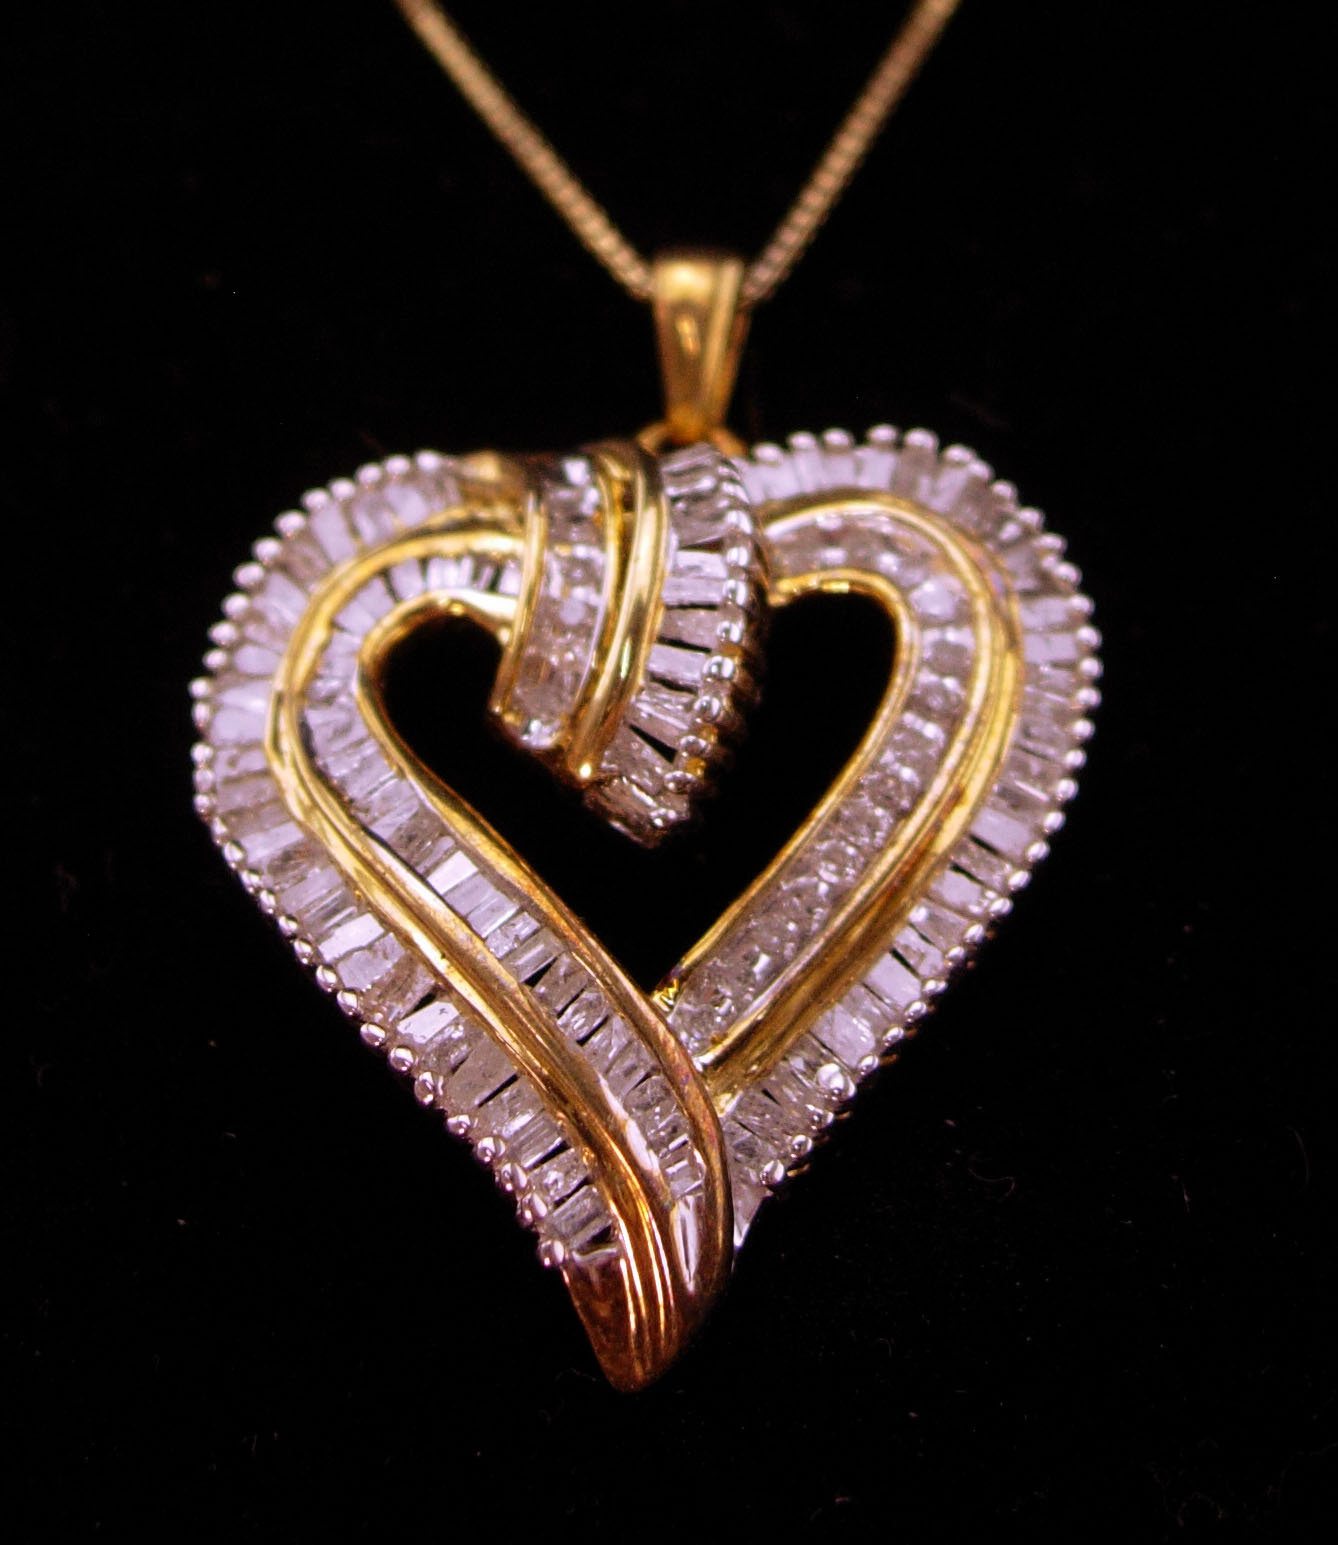 Primary image for Exquisite genuine 100 diamond baguette Heart Pendant necklace - large 14kt gold 